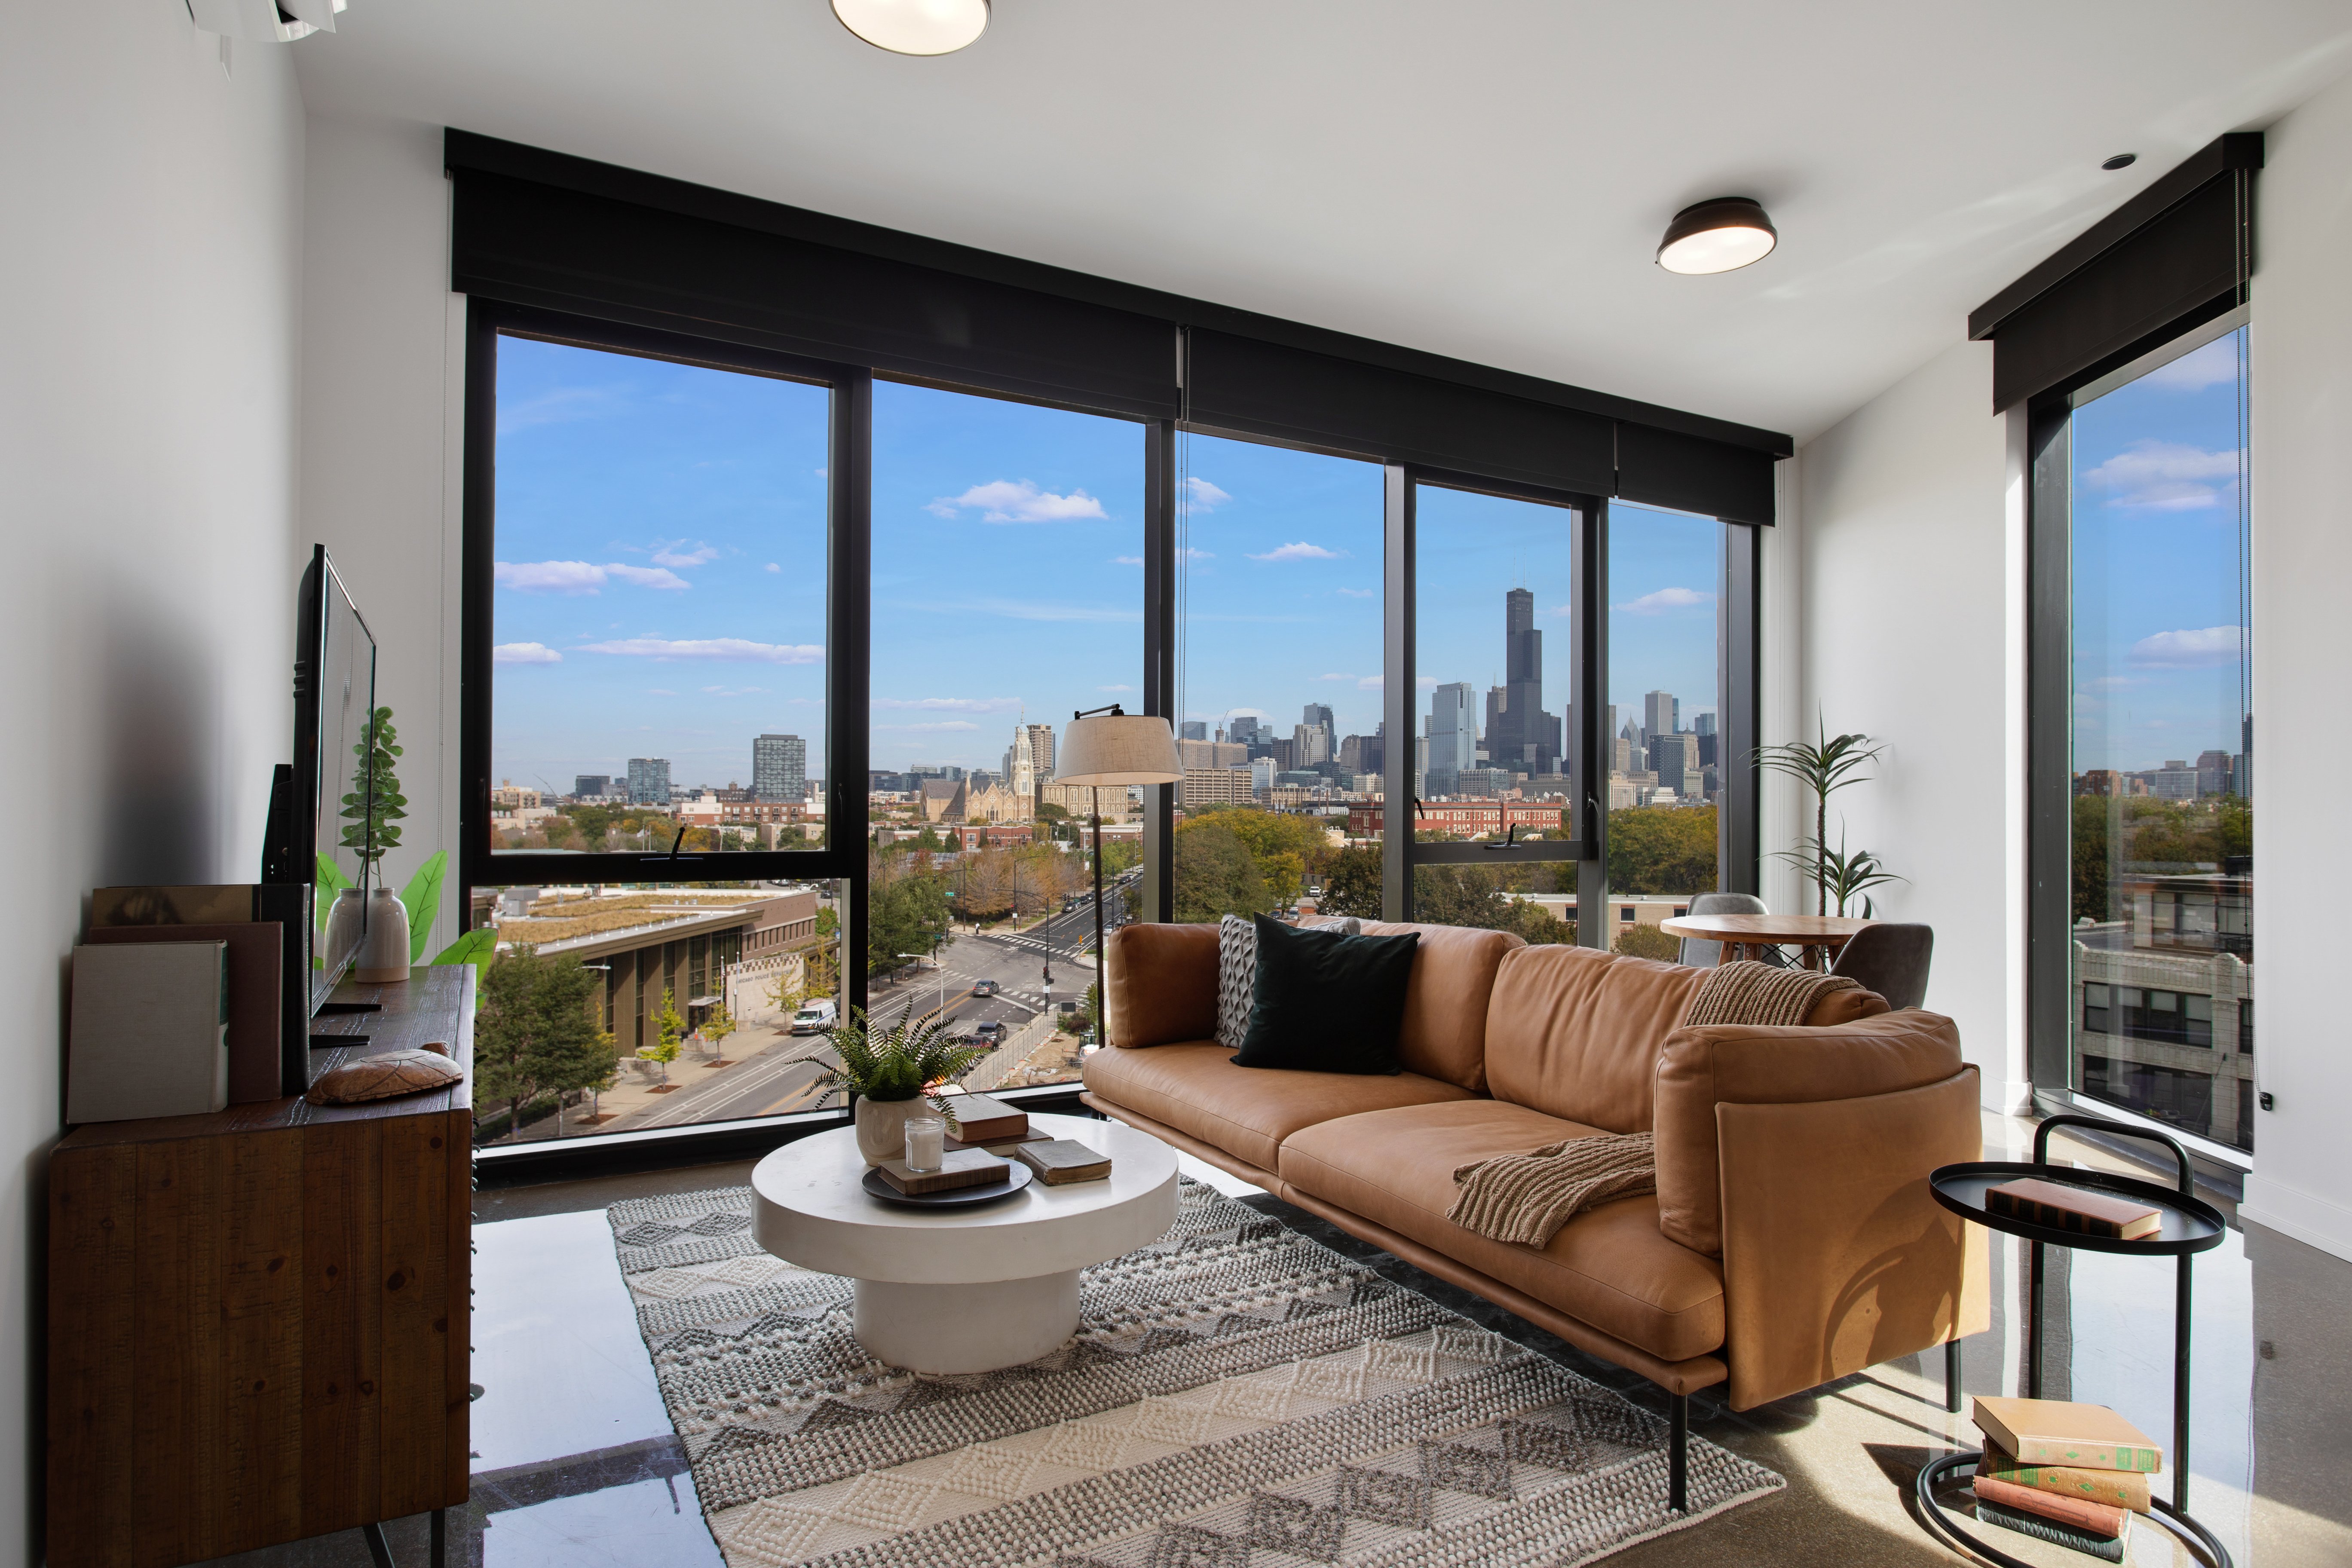 Interior photograph of apartment living room with skyline view